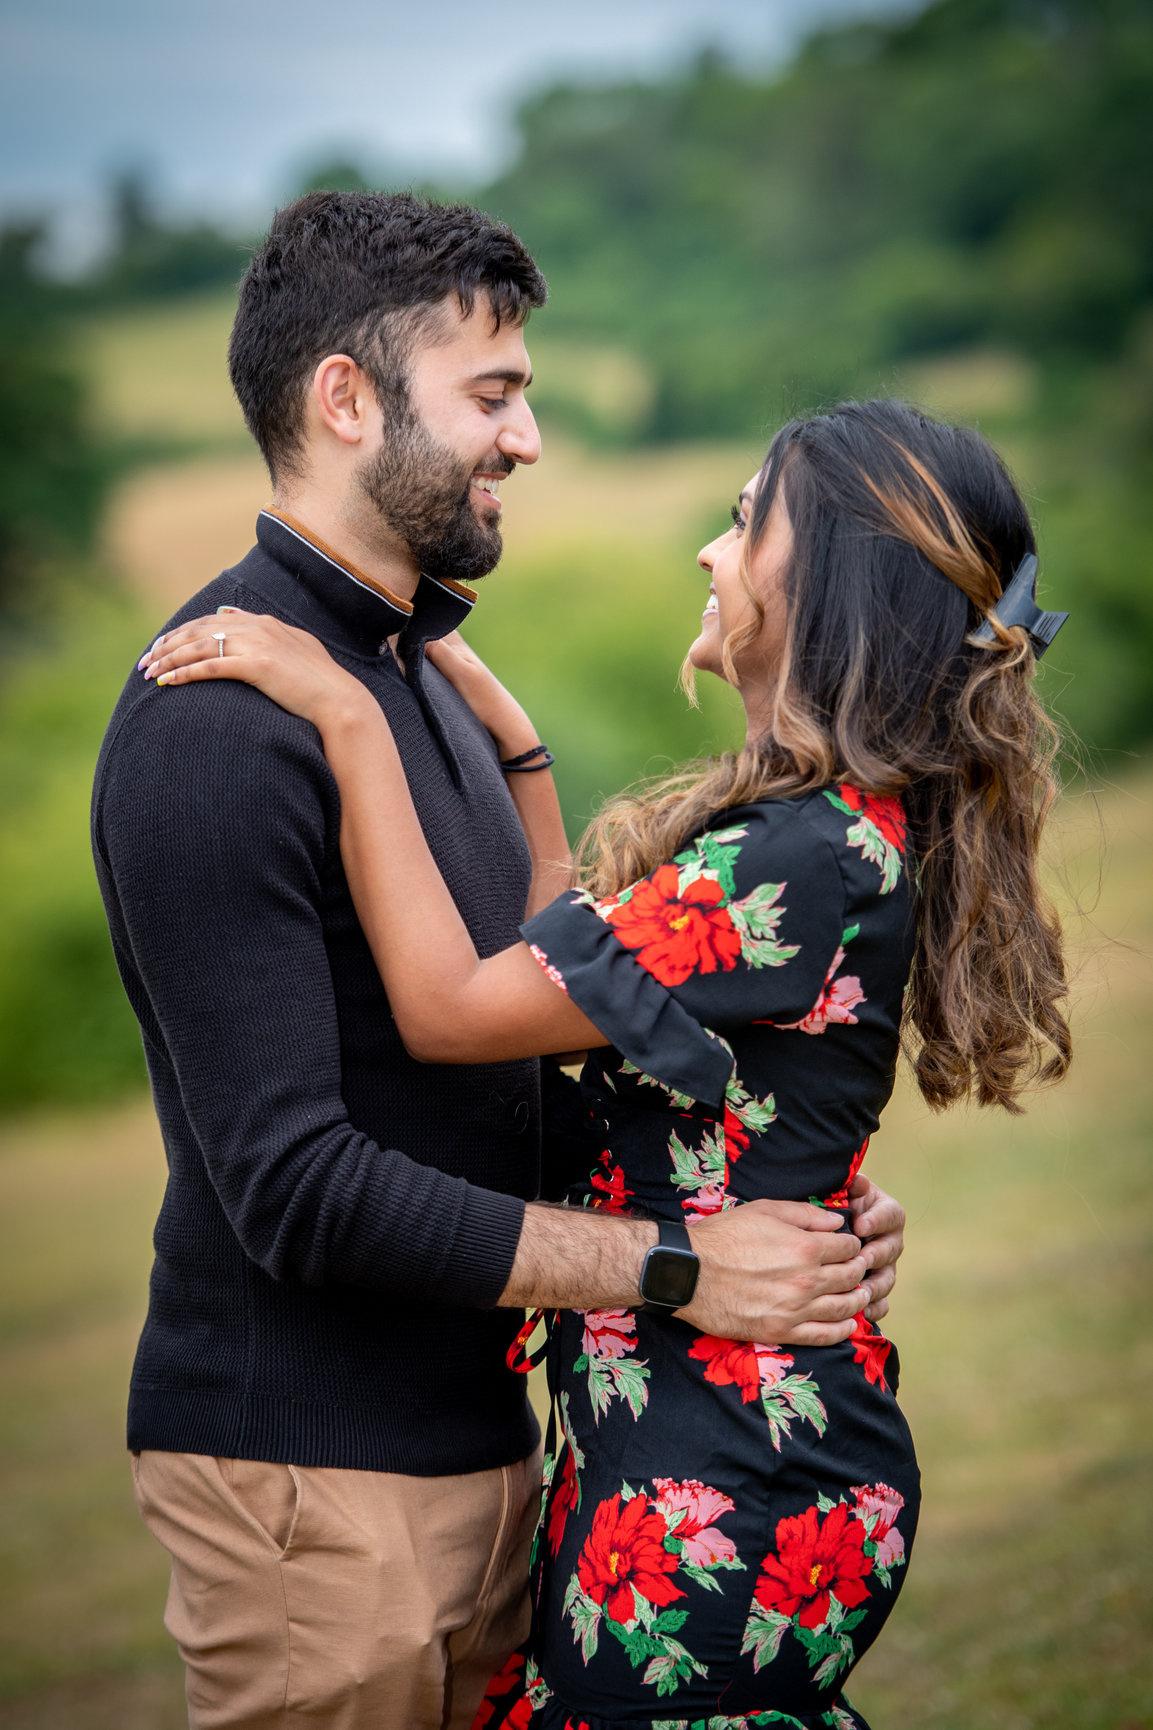 9 Simple Poses for Wedding & Engagement Photos